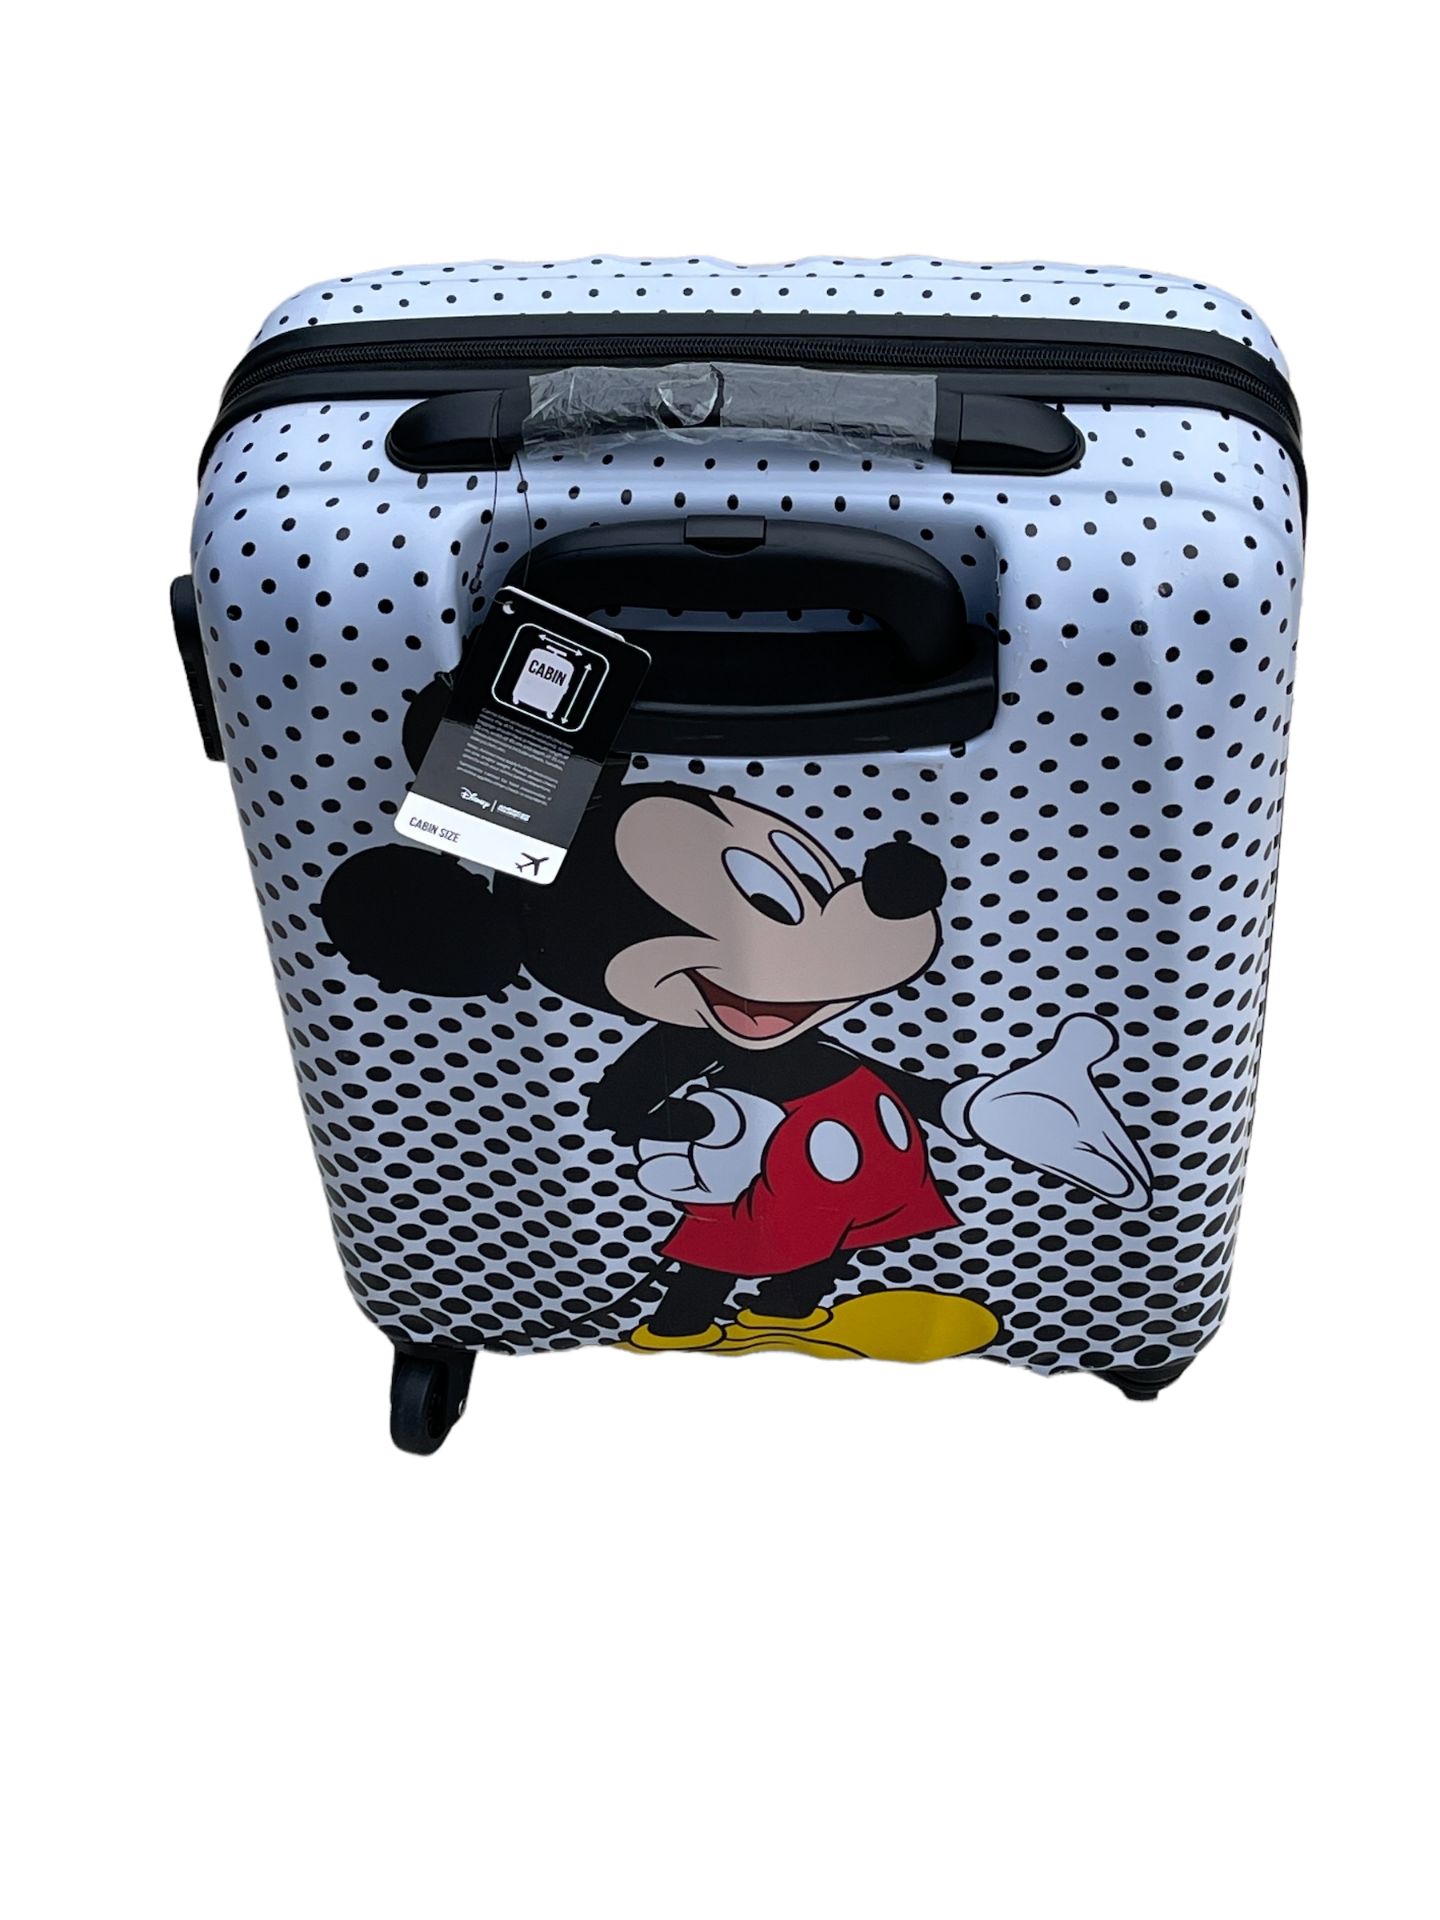 American Tourister Disney Mickey Mouse Polka Dot Carry-on Spinner Case 55cm - RRP £145 - Image 4 of 9